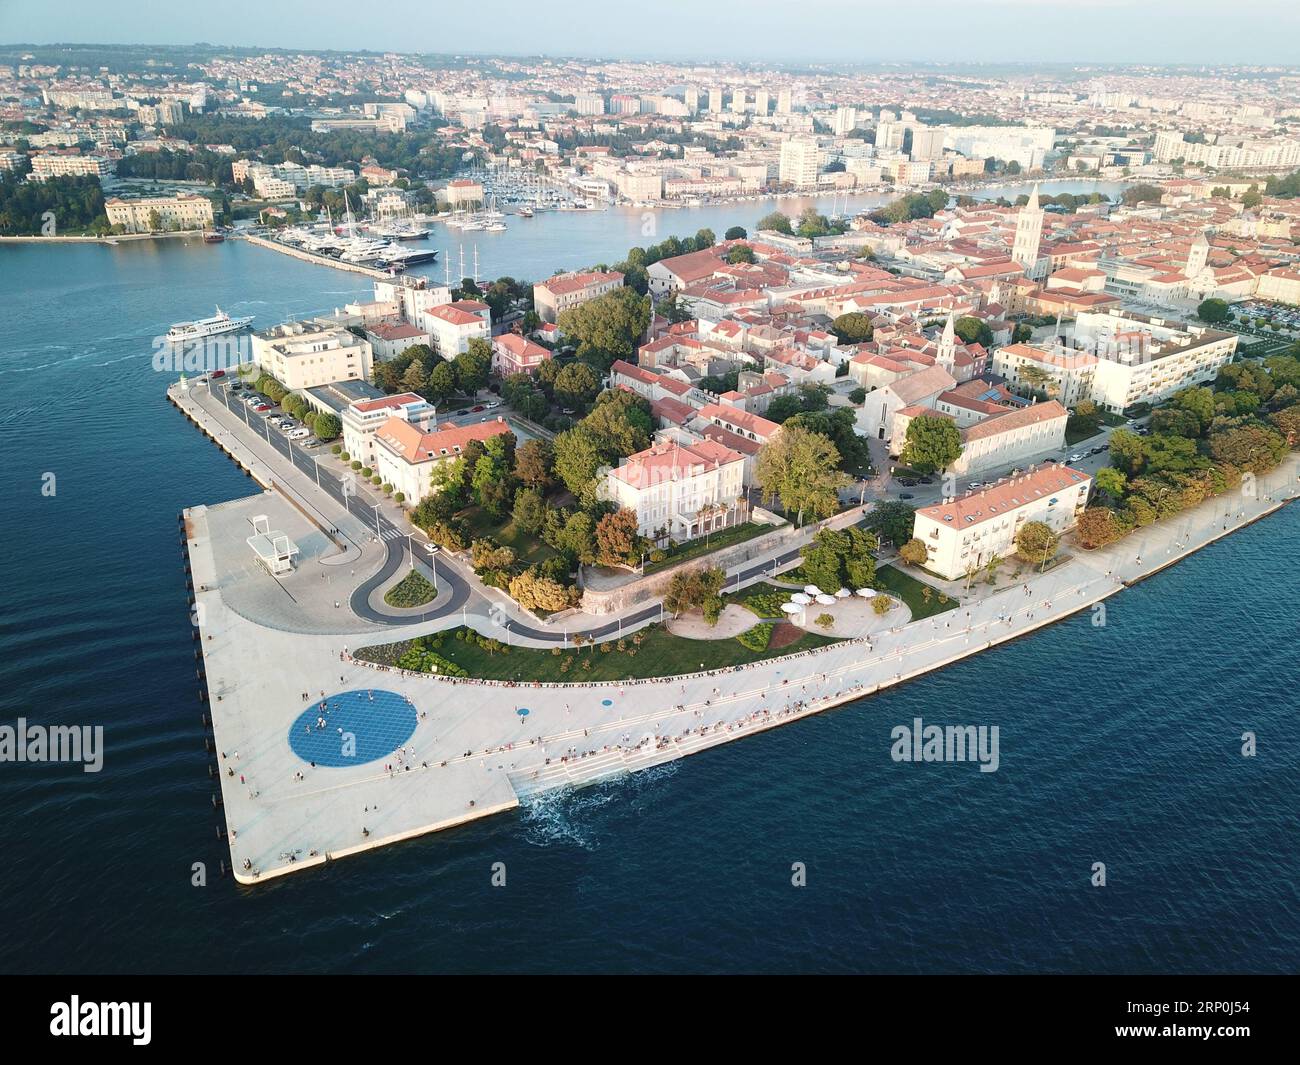 (180516) -- ZAGREB, May 16, 2018 -- Aerial photo taken on May 13, 2018 shows scenery of coastal city Zadar in Croatia. Zadar city is one of the well known Croatian tourist attractions situated on the Adriatic Sea along the west coast of the country. ) (ly) CROATIA-ZADAR-SCENERY GaoxLei PUBLICATIONxNOTxINxCHN Stock Photo